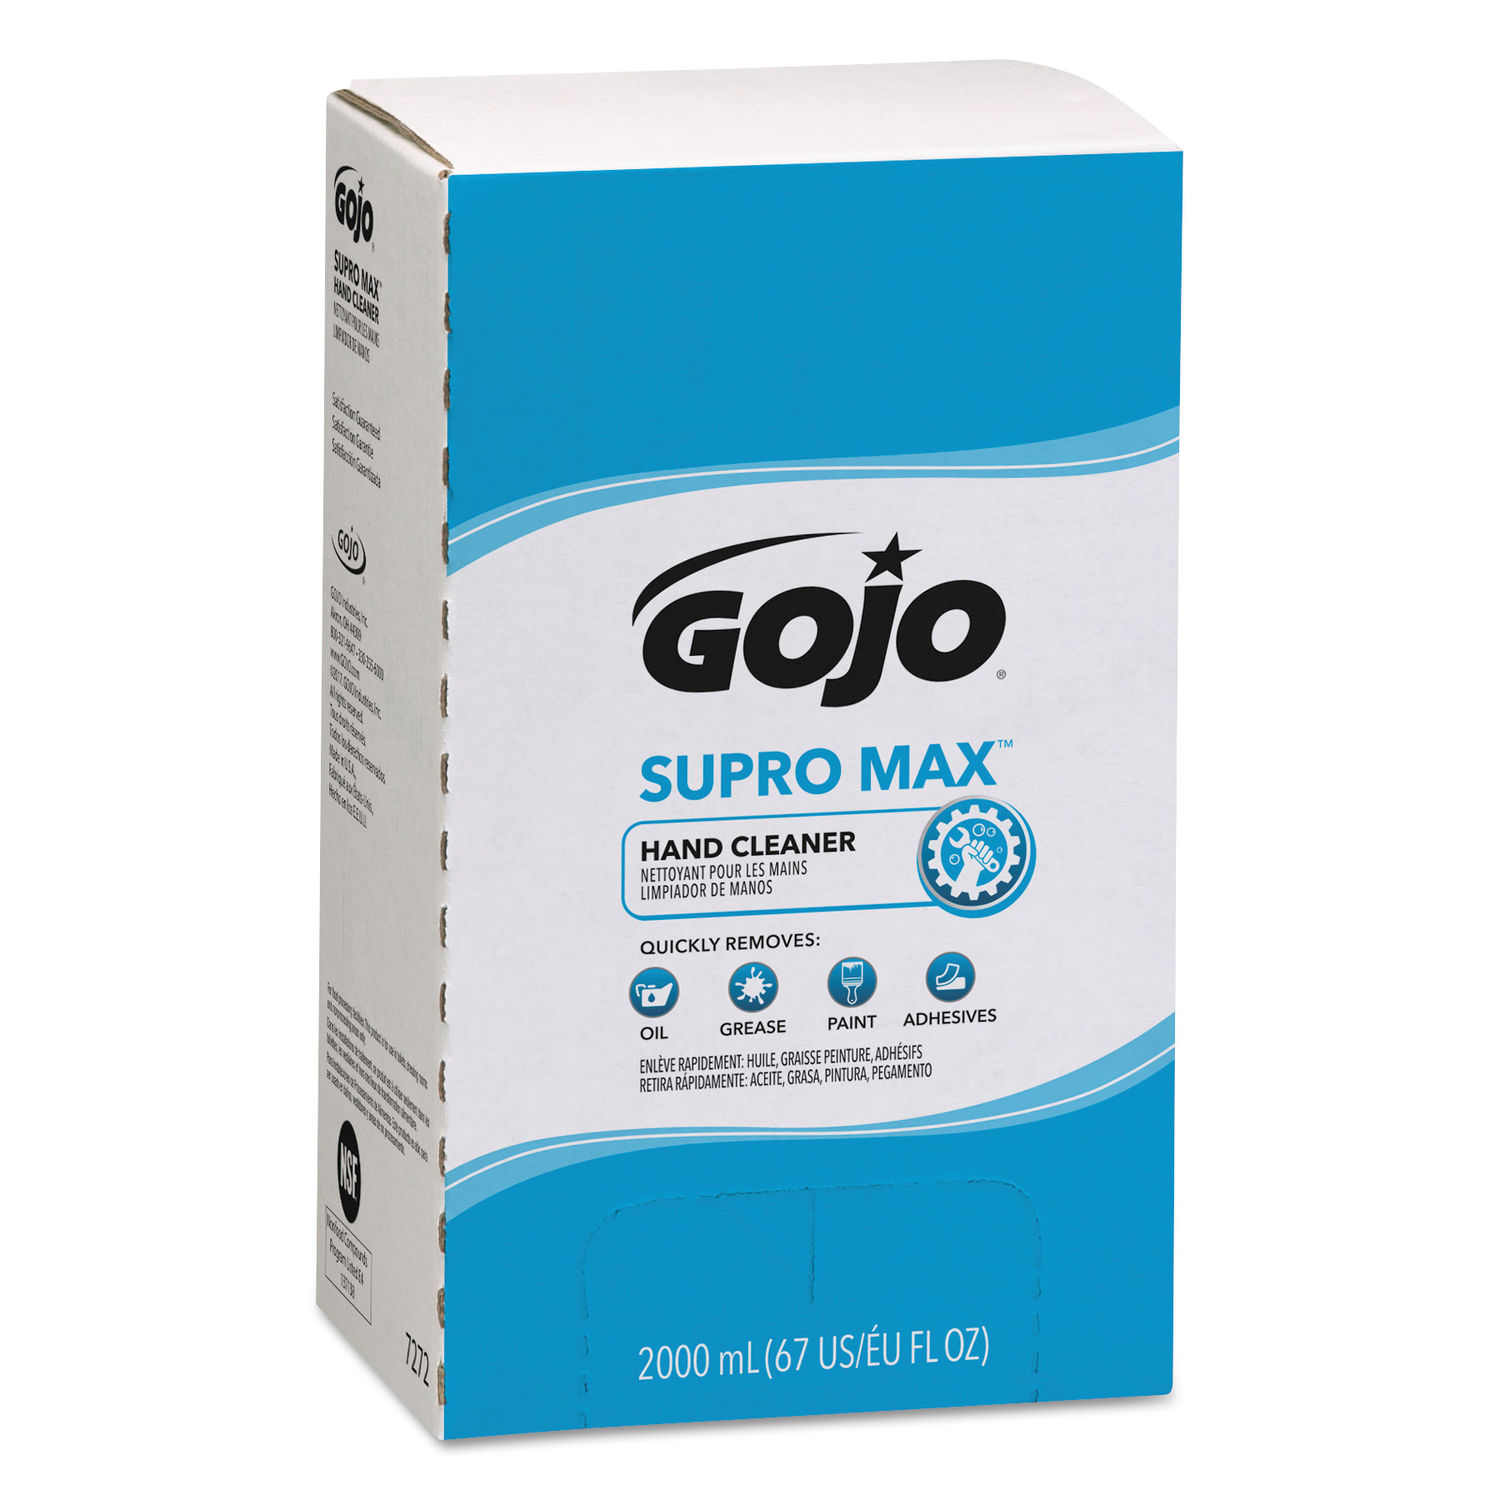 SUPRO MAX Hand Cleaner Unscented, 2,000 mL Pouch